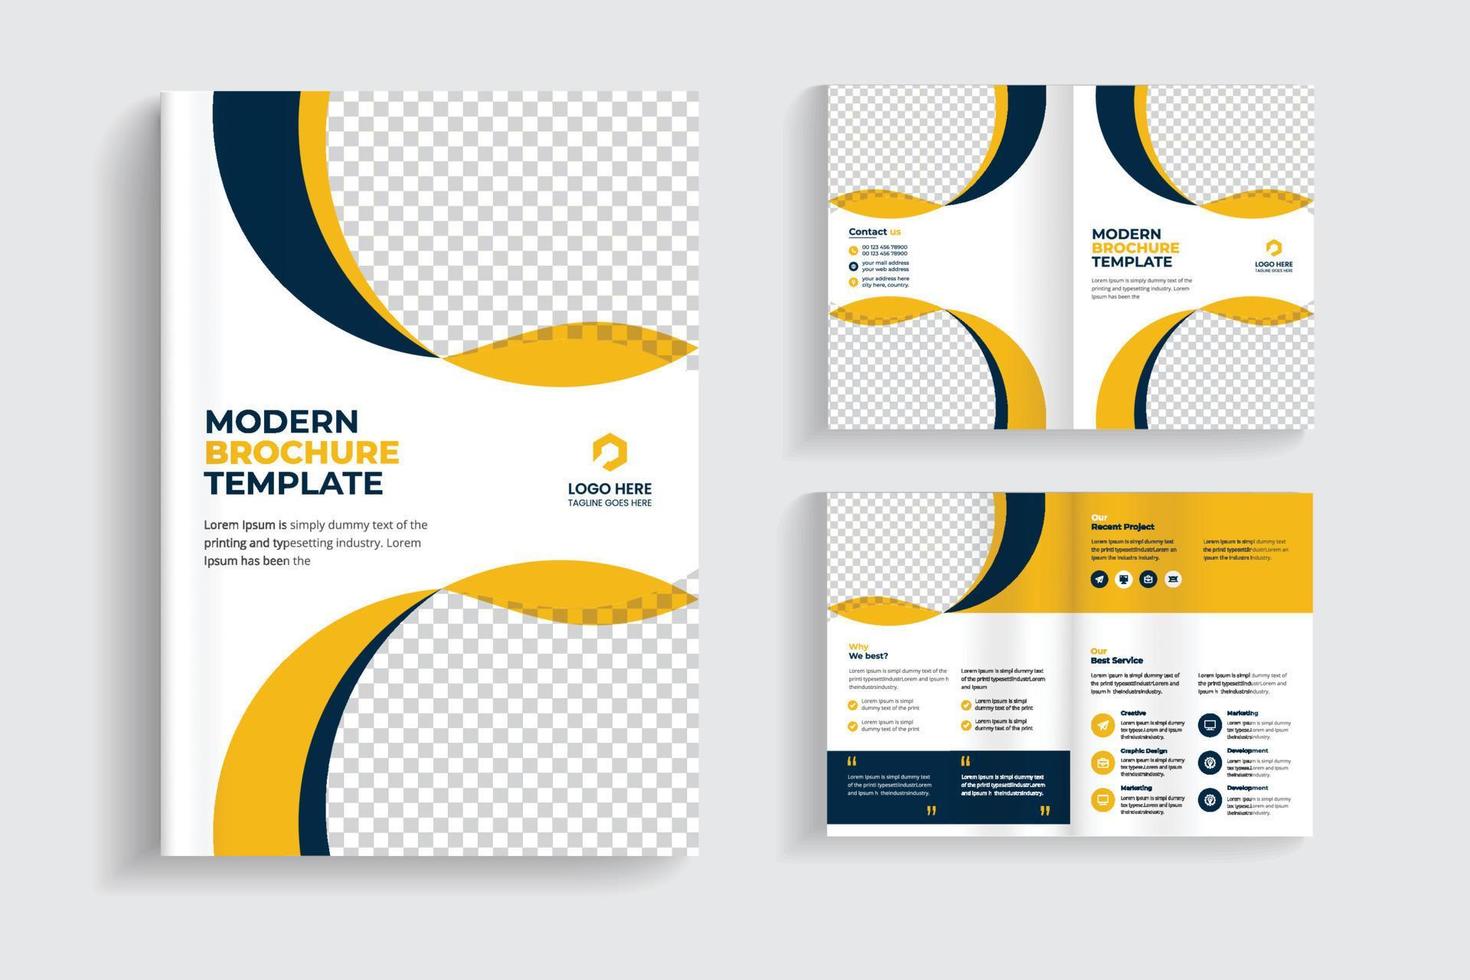 4 pages clean and minimal multipurpose bifold brochure design or corporate company brochure design. fully organized and editable brochure template design. vector